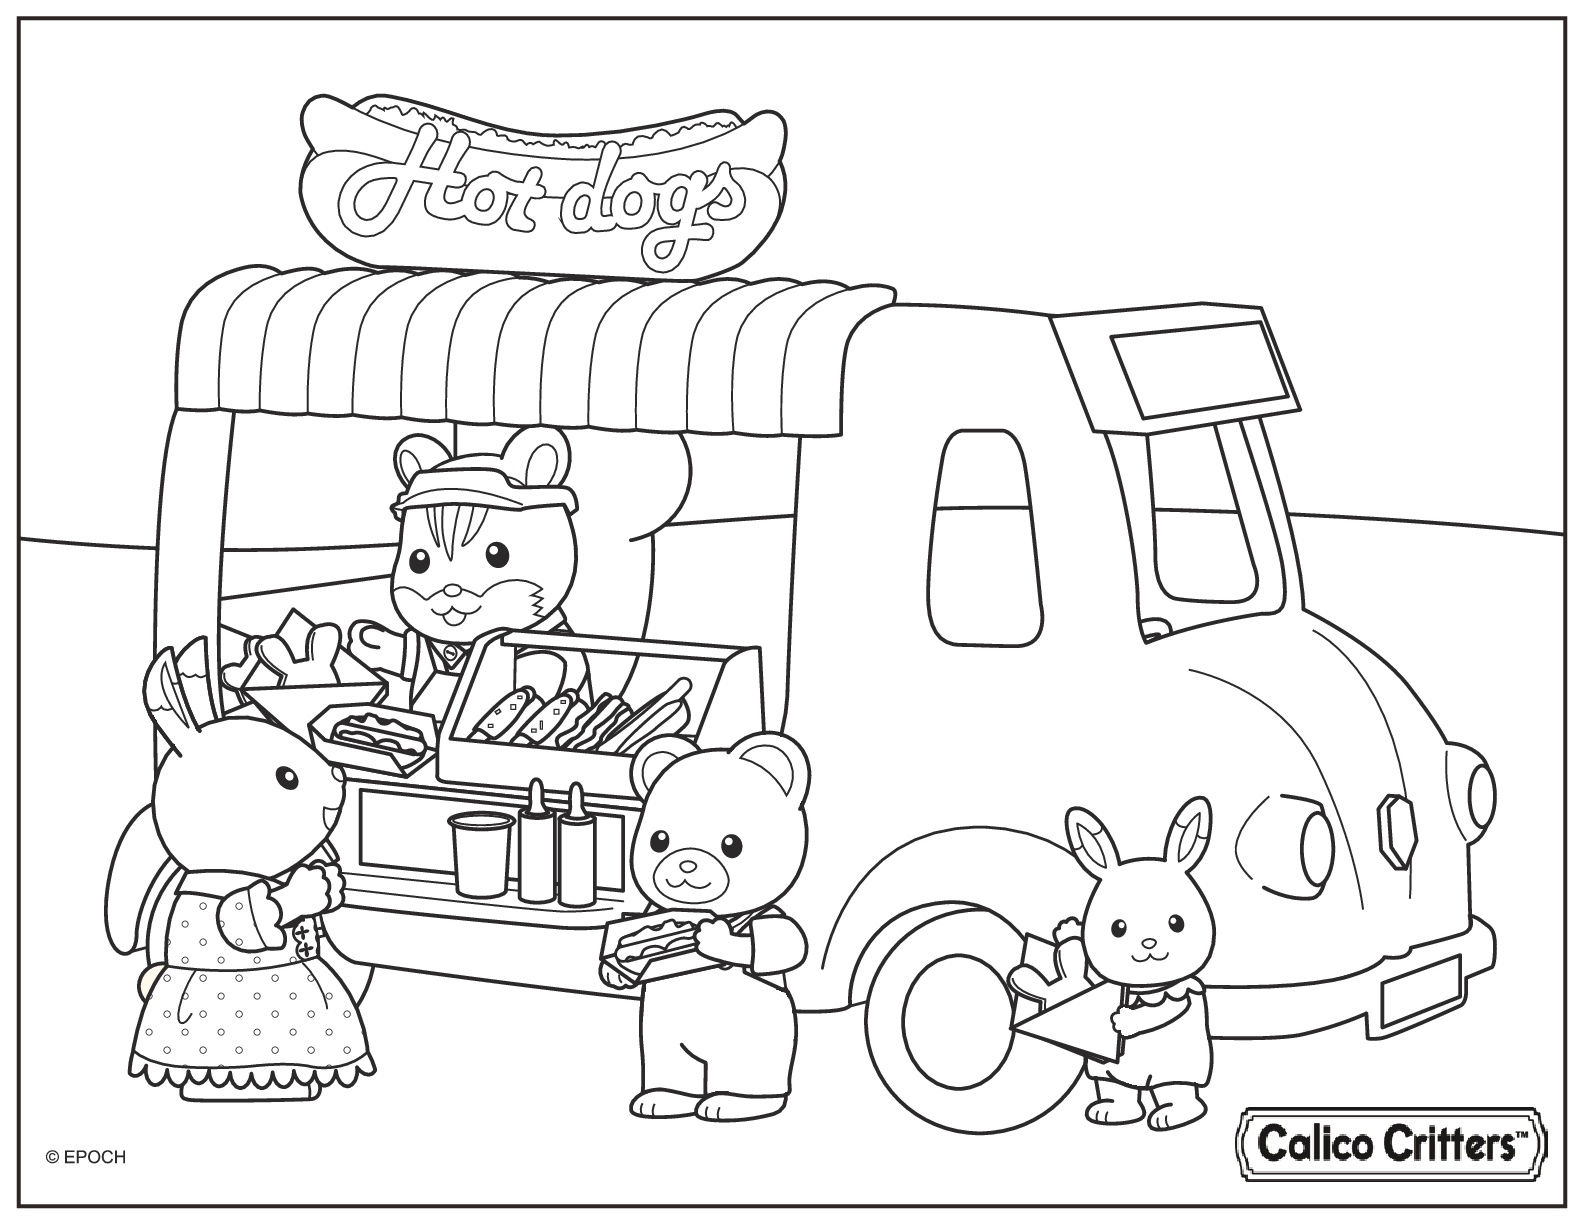 Calico Critters Selling Hot Dogs